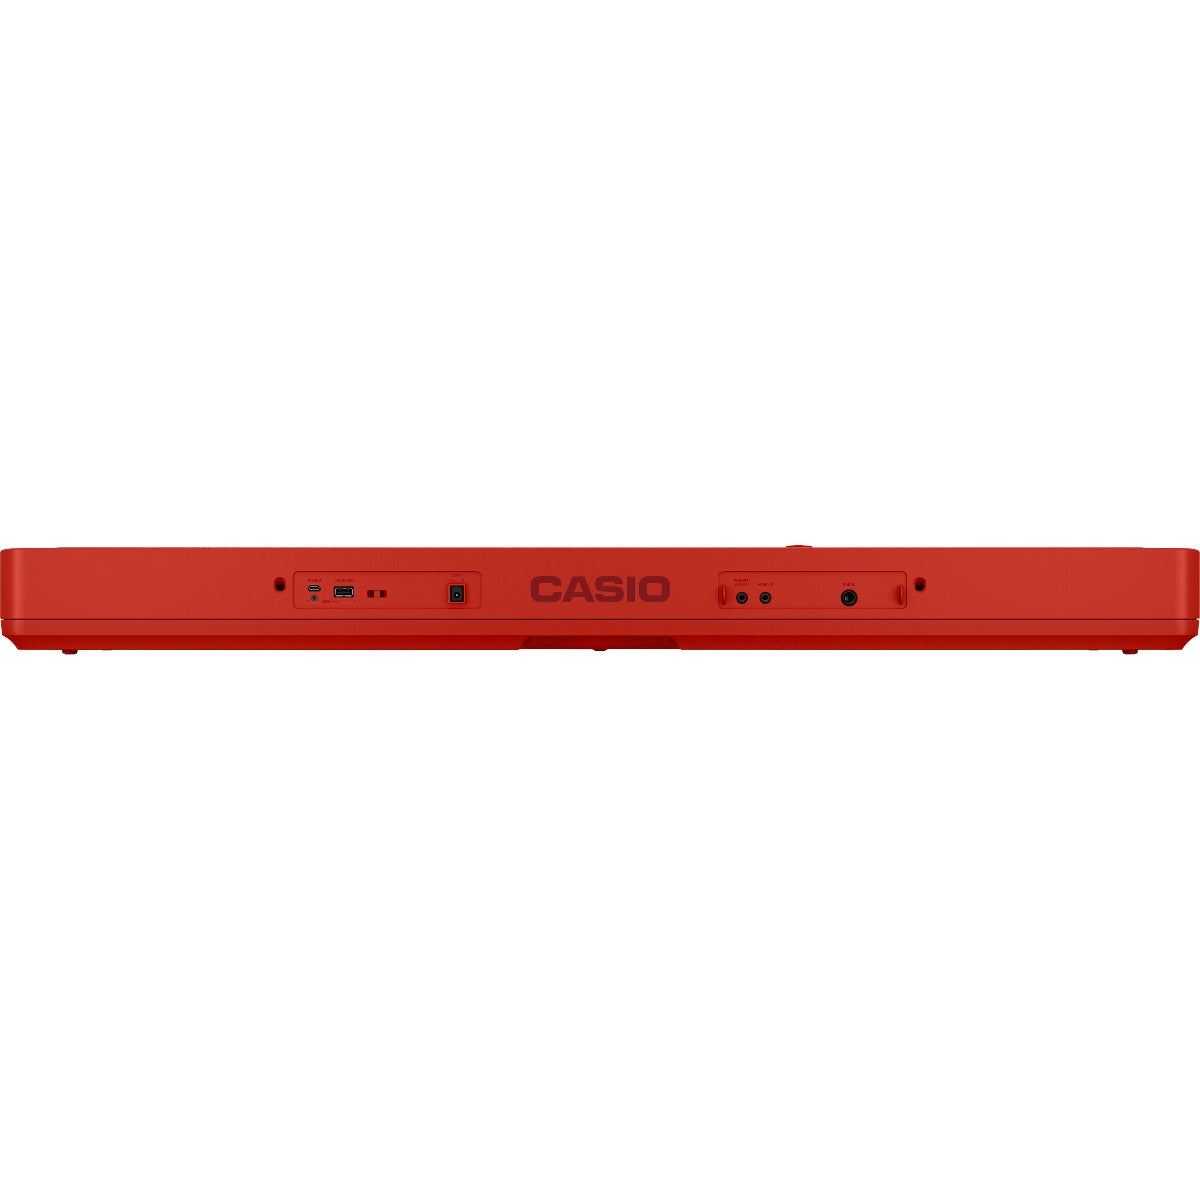 Rear view of Casio Casiotone CT-S1 Portable Keyboard - Red